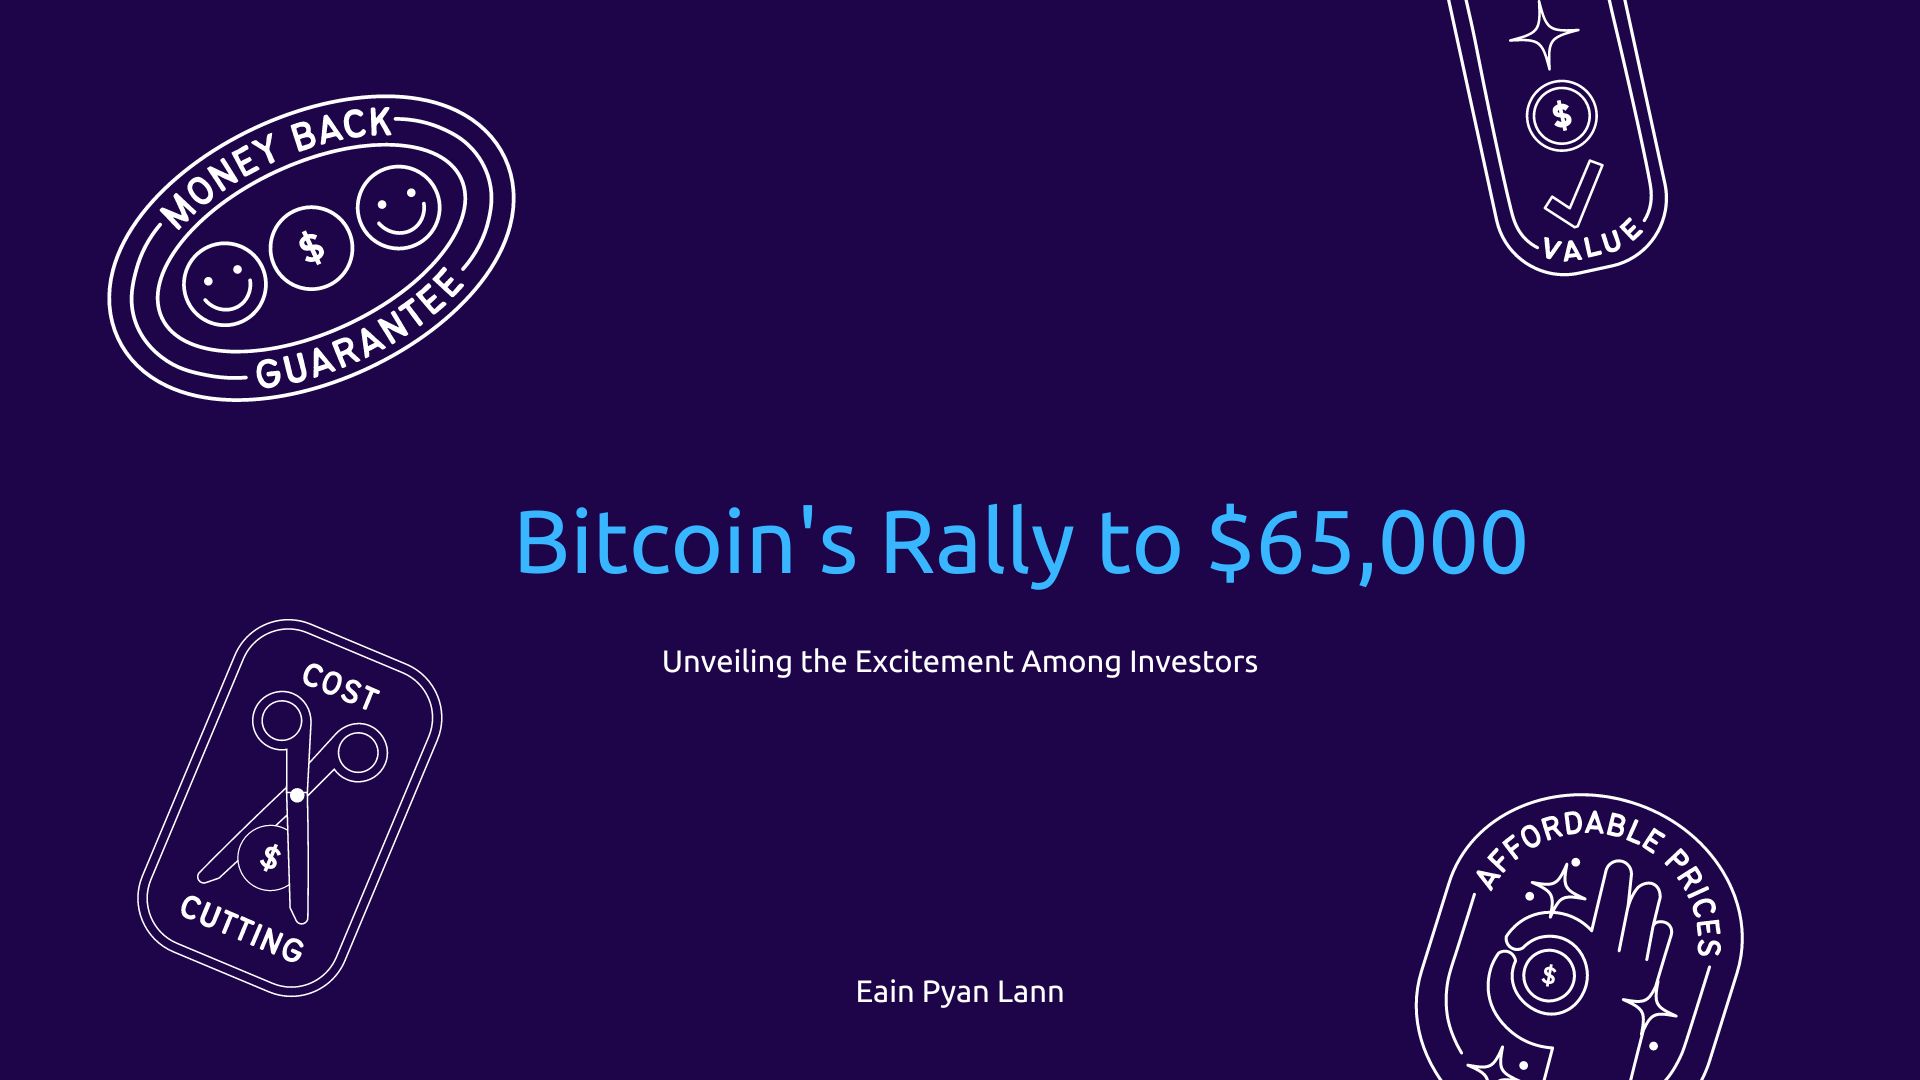 Bitcoin's Rally to $65,000: Unveiling the Excitement Among Investors